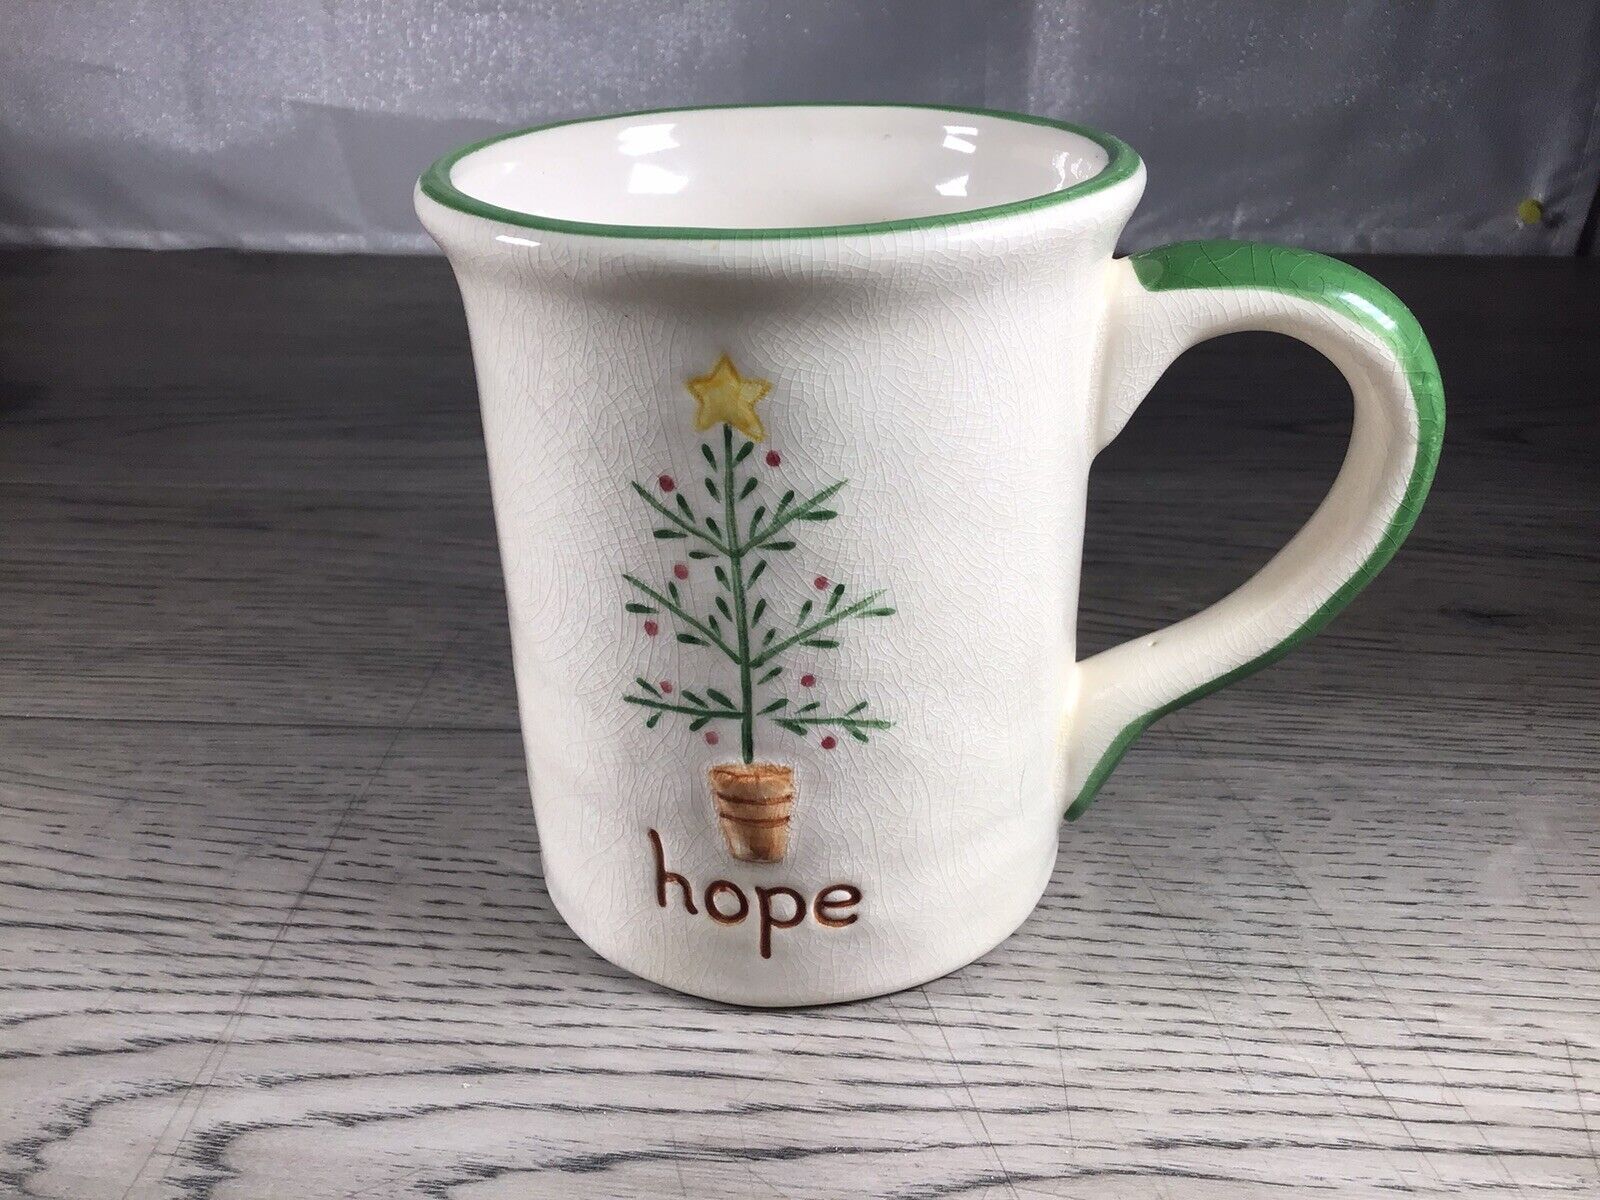 Ceramic Crackle “Hope” Coffee Cup (20 Oz Never Used)